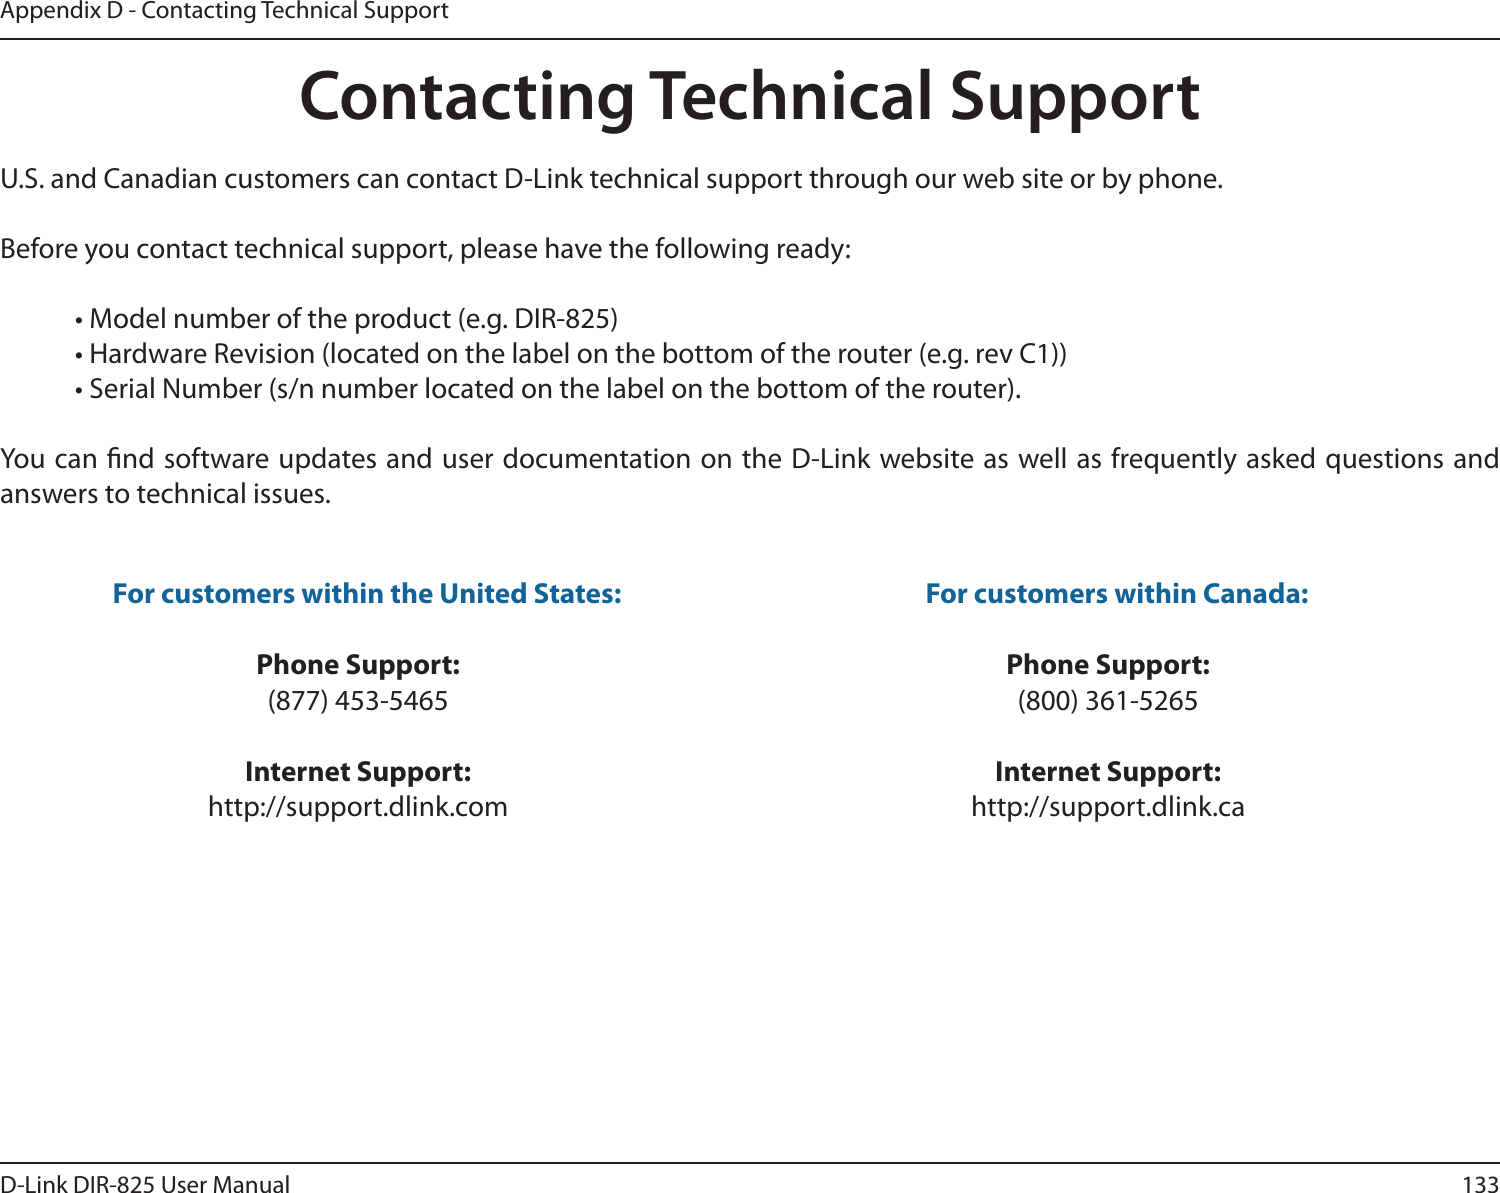 133D-Link DIR-825 User ManualAppendix D - Contacting Technical SupportContacting Technical SupportU.S. and Canadian customers can contact D-Link technical support through our web site or by phone.Before you contact technical support, please have the following ready:  • Model number of the product (e.g. DIR-825)  • Hardware Revision (located on the label on the bottom of the router (e.g. rev C1))  • Serial Number (s/n number located on the label on the bottom of the router). You can nd software updates and user documentation on the D-Link website as well as frequently asked questions and answers to technical issues.For customers within the United States: Phone Support:(877) 453-5465Internet Support:http://support.dlink.com For customers within Canada: Phone Support:(800) 361-5265Internet Support:http://support.dlink.ca 